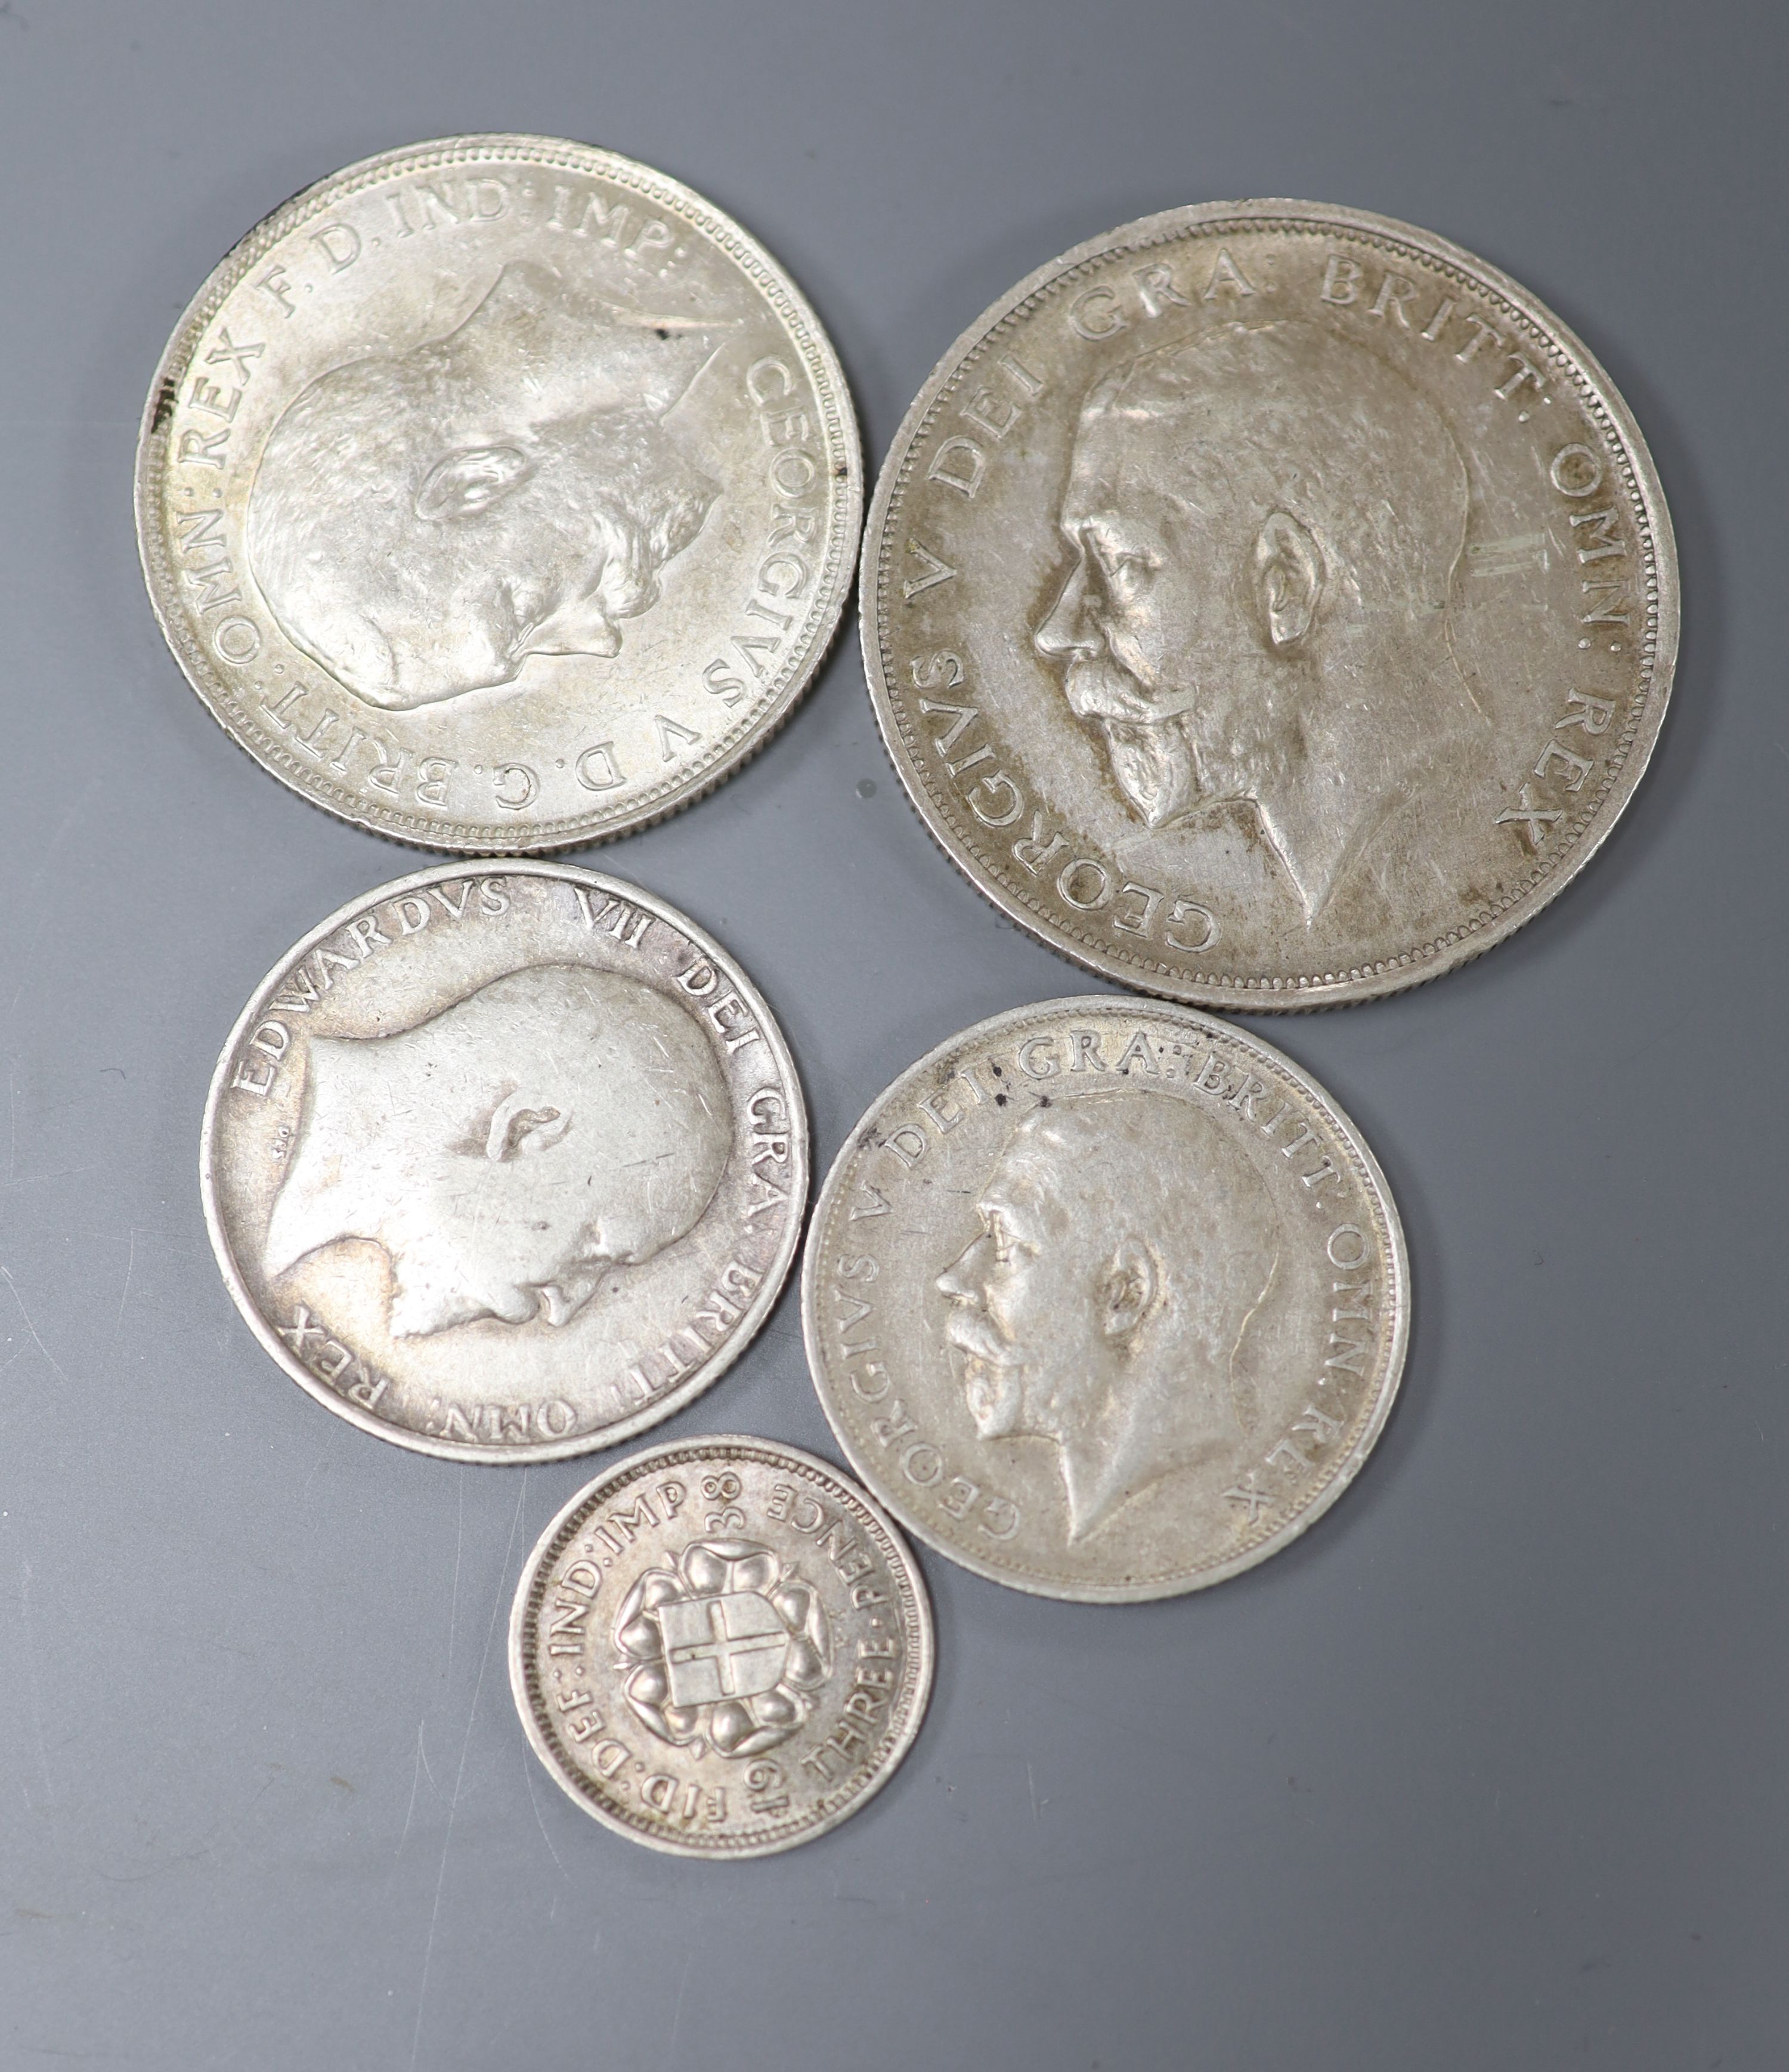 Edward VII to George VI silver coins,